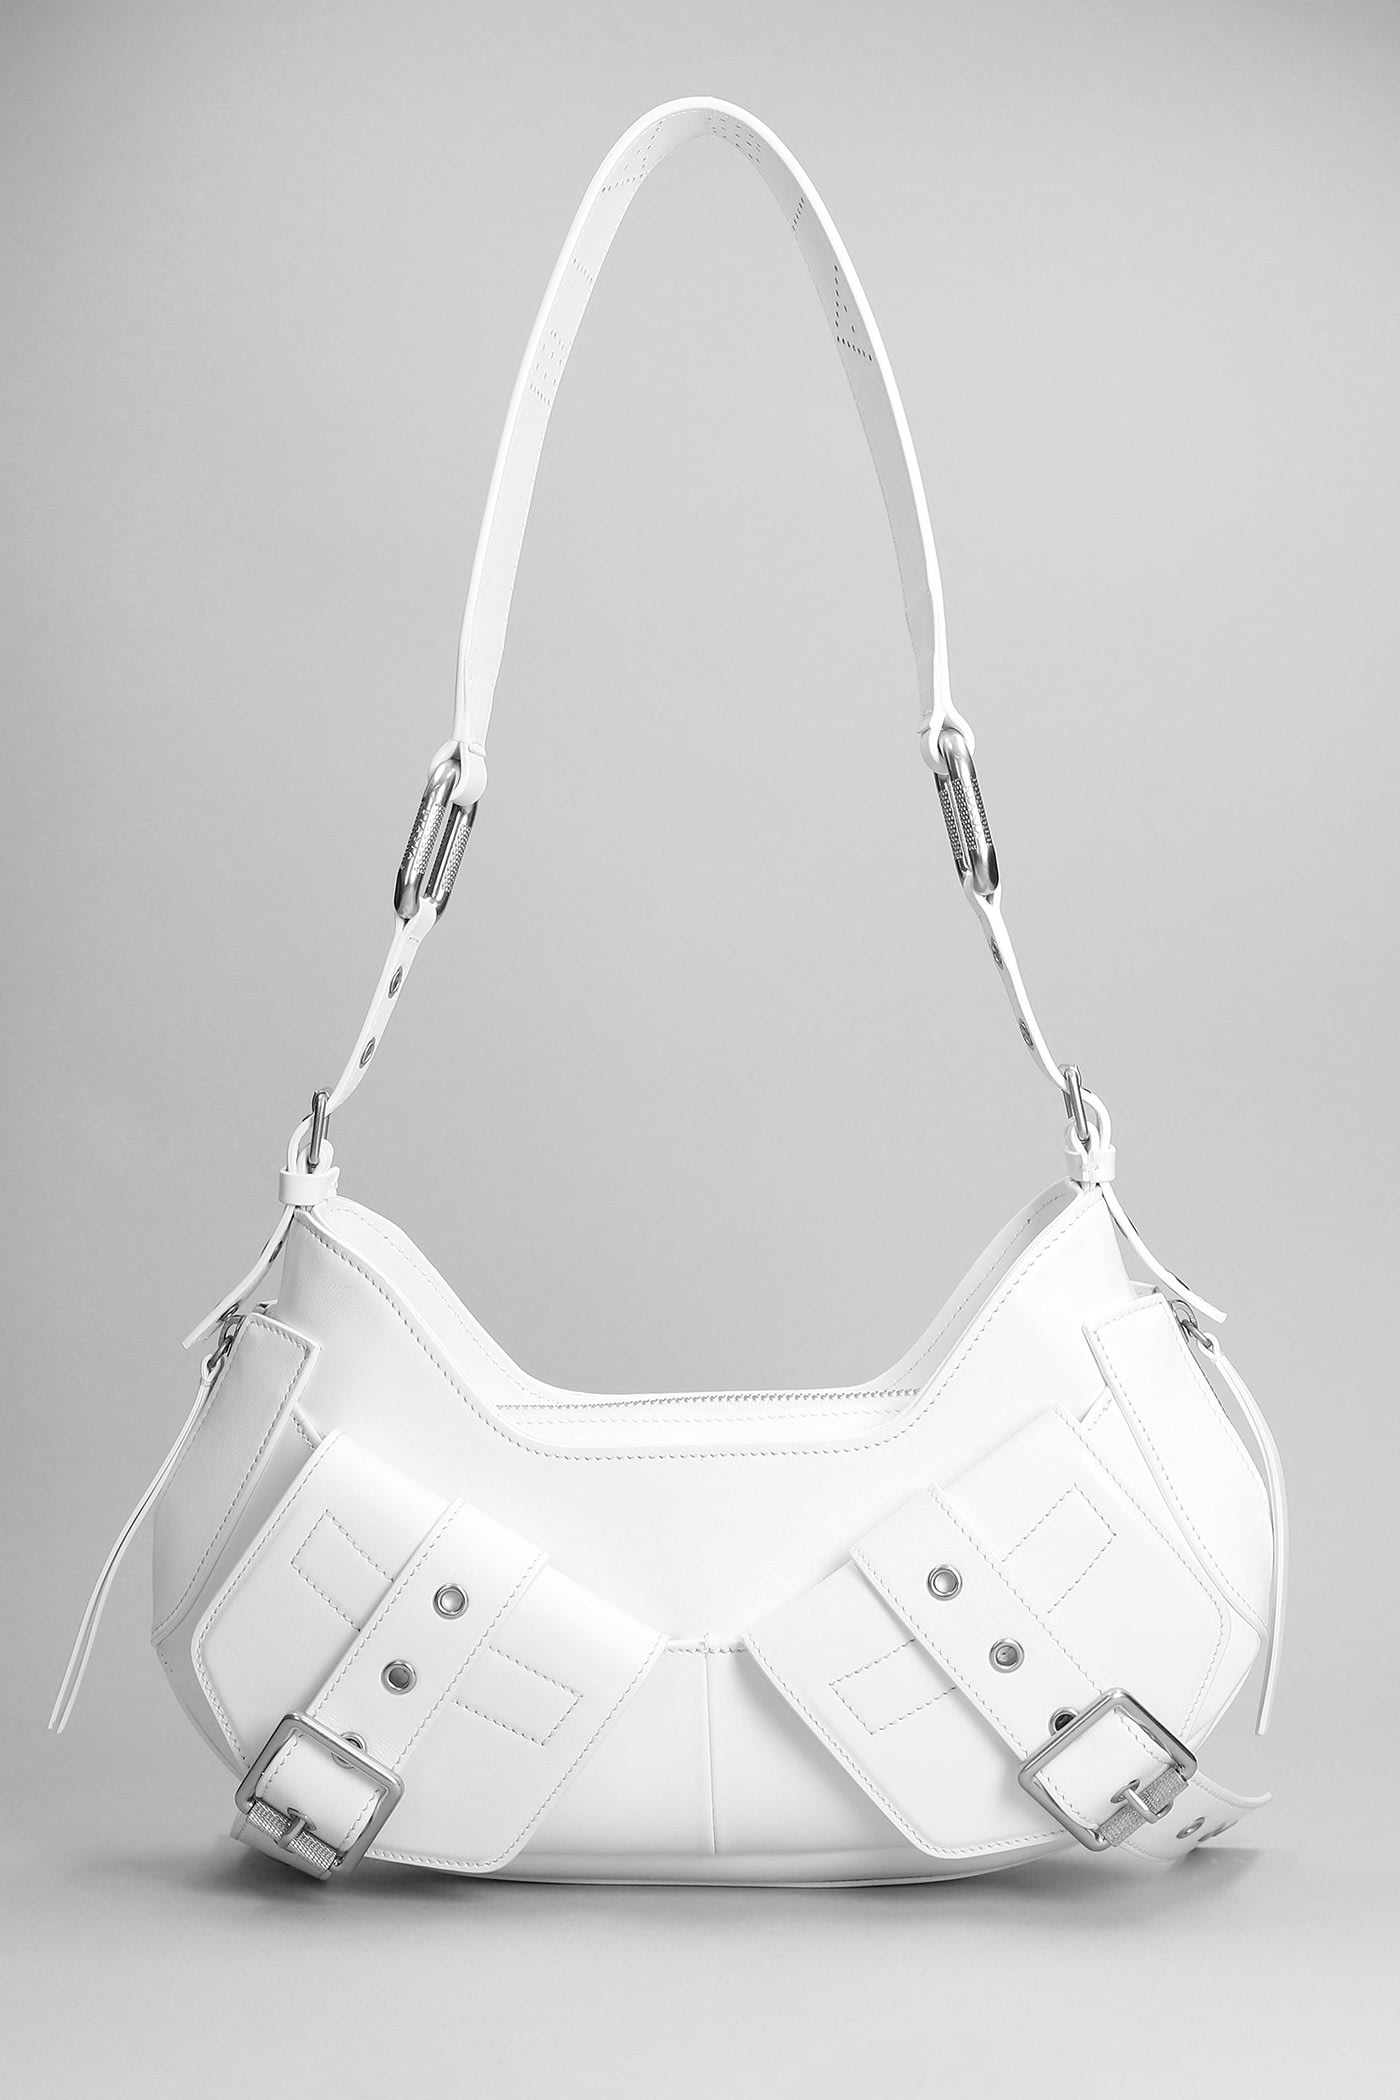 BIASIA SHOULDER BAG IN WHITE LEATHER